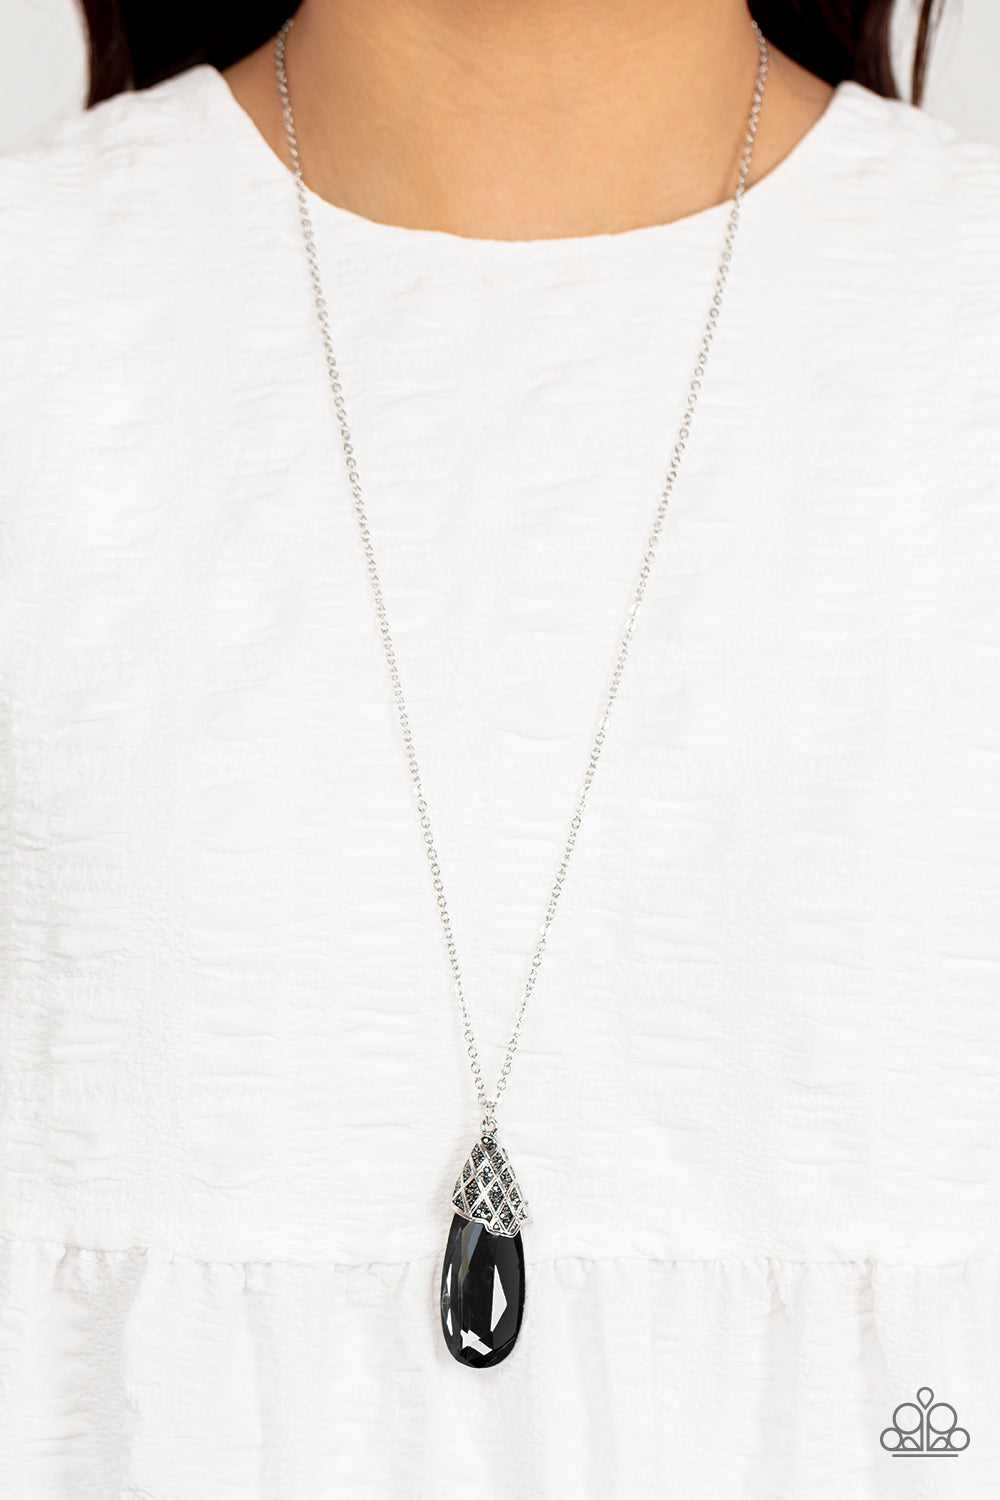 Dibs on the Dazzle - Silver Smoky Teardrop Gem Pendant Paparazzi Necklace & matching earrings